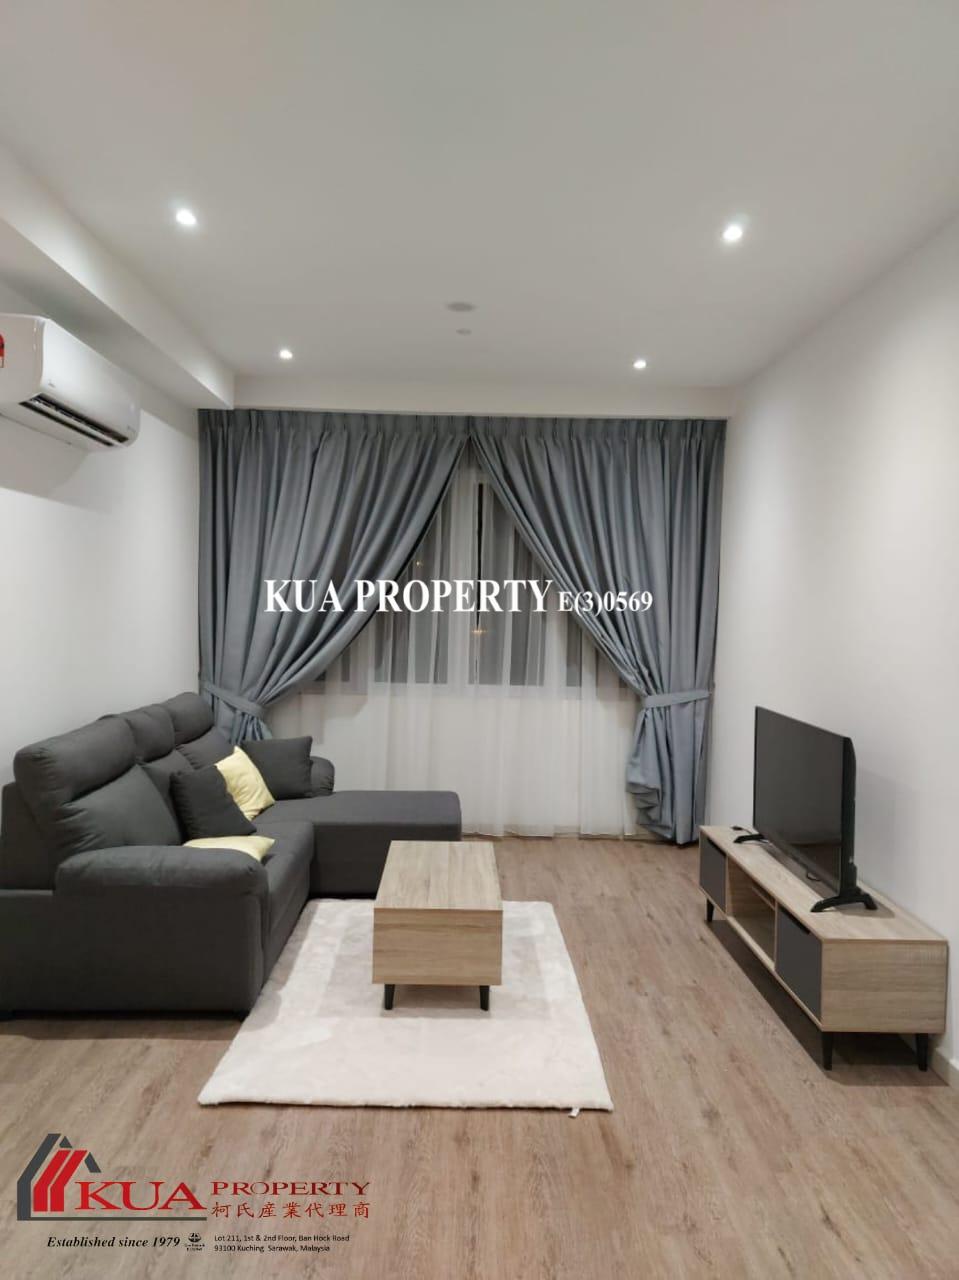 Avona Residence Apartment FOR RENT! at Tabuan Tranquility